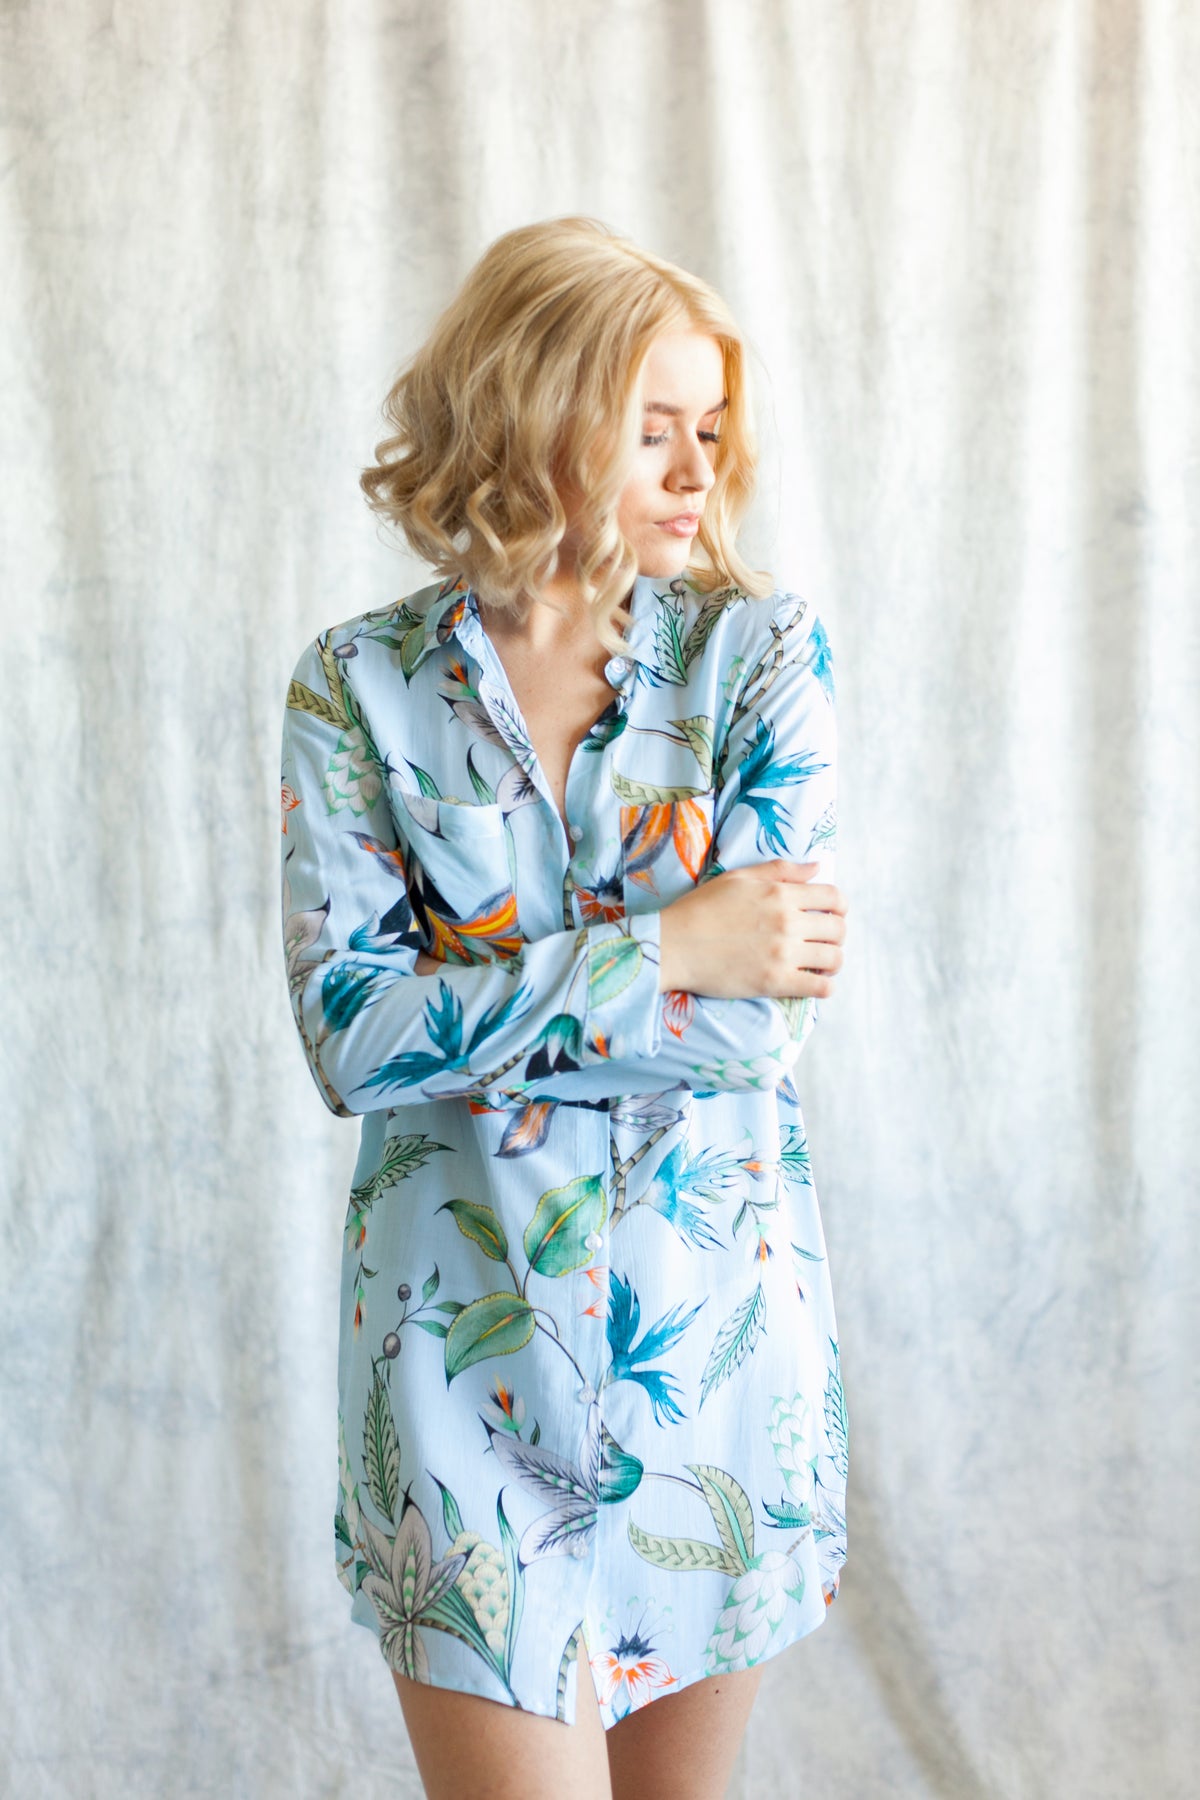 Light blue boyfriend shirt and sleep shirt from by catalfo in the Capri tropical floral print